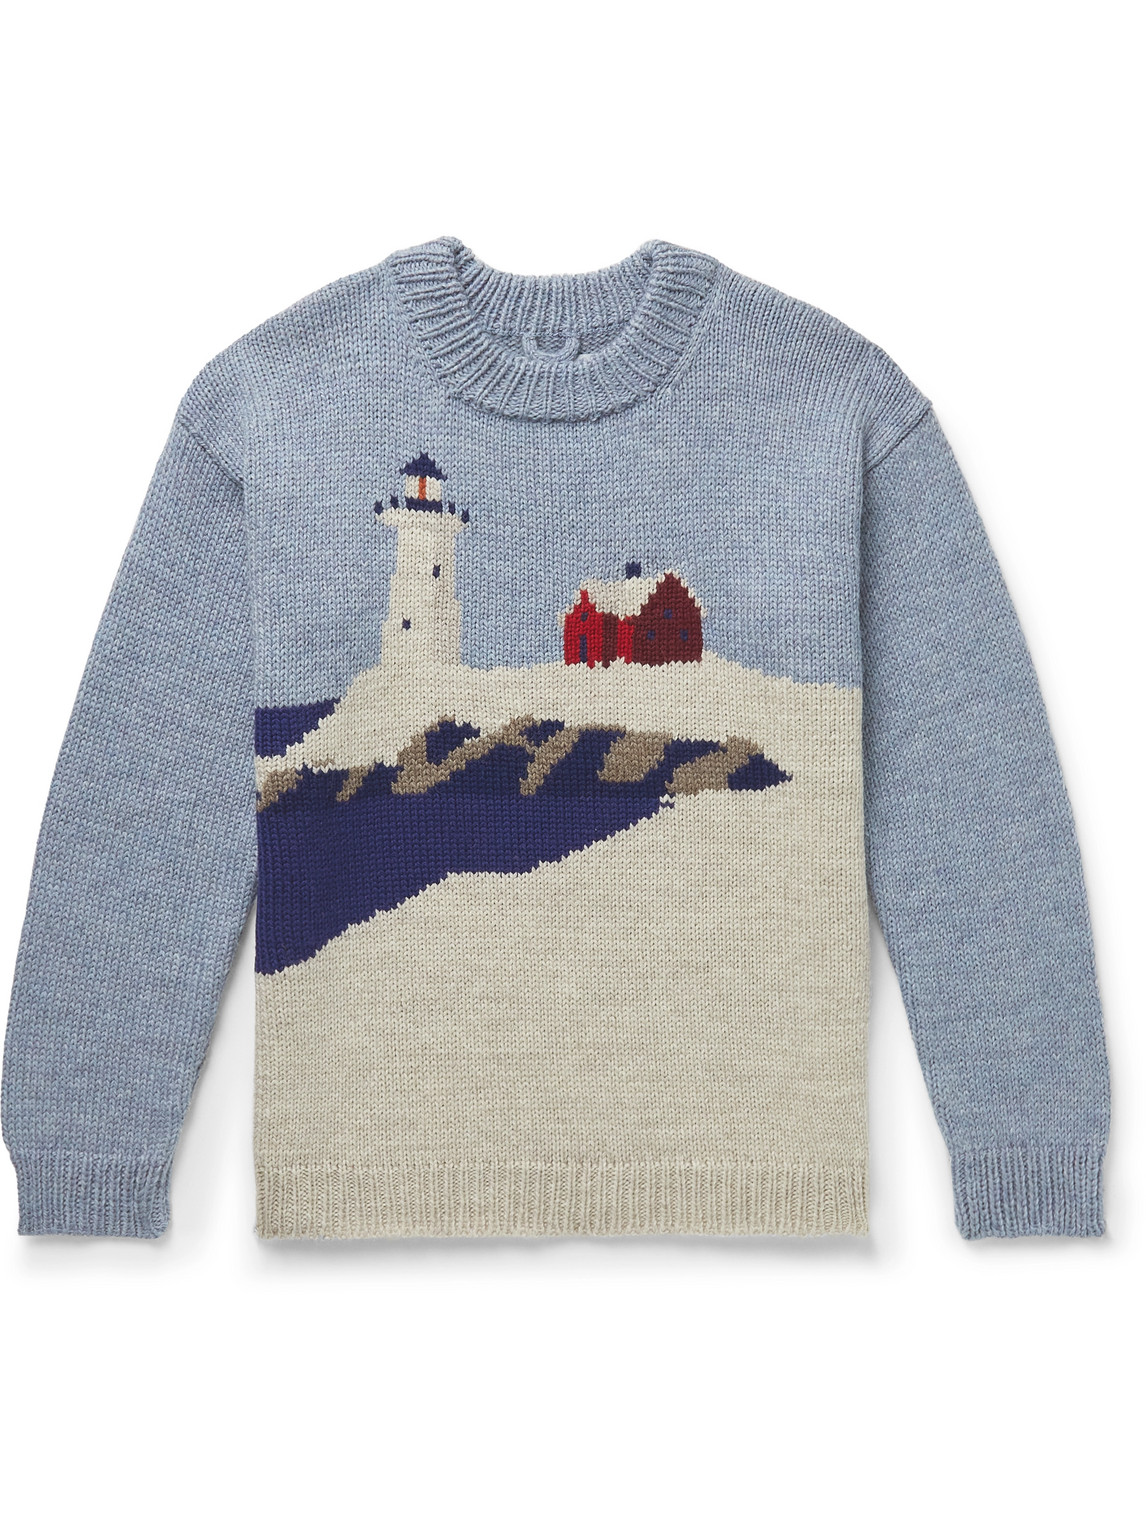 BODE HIGHLAND LIGHTHOUSE JACQUARD-KNITTED WOOL SWEATER